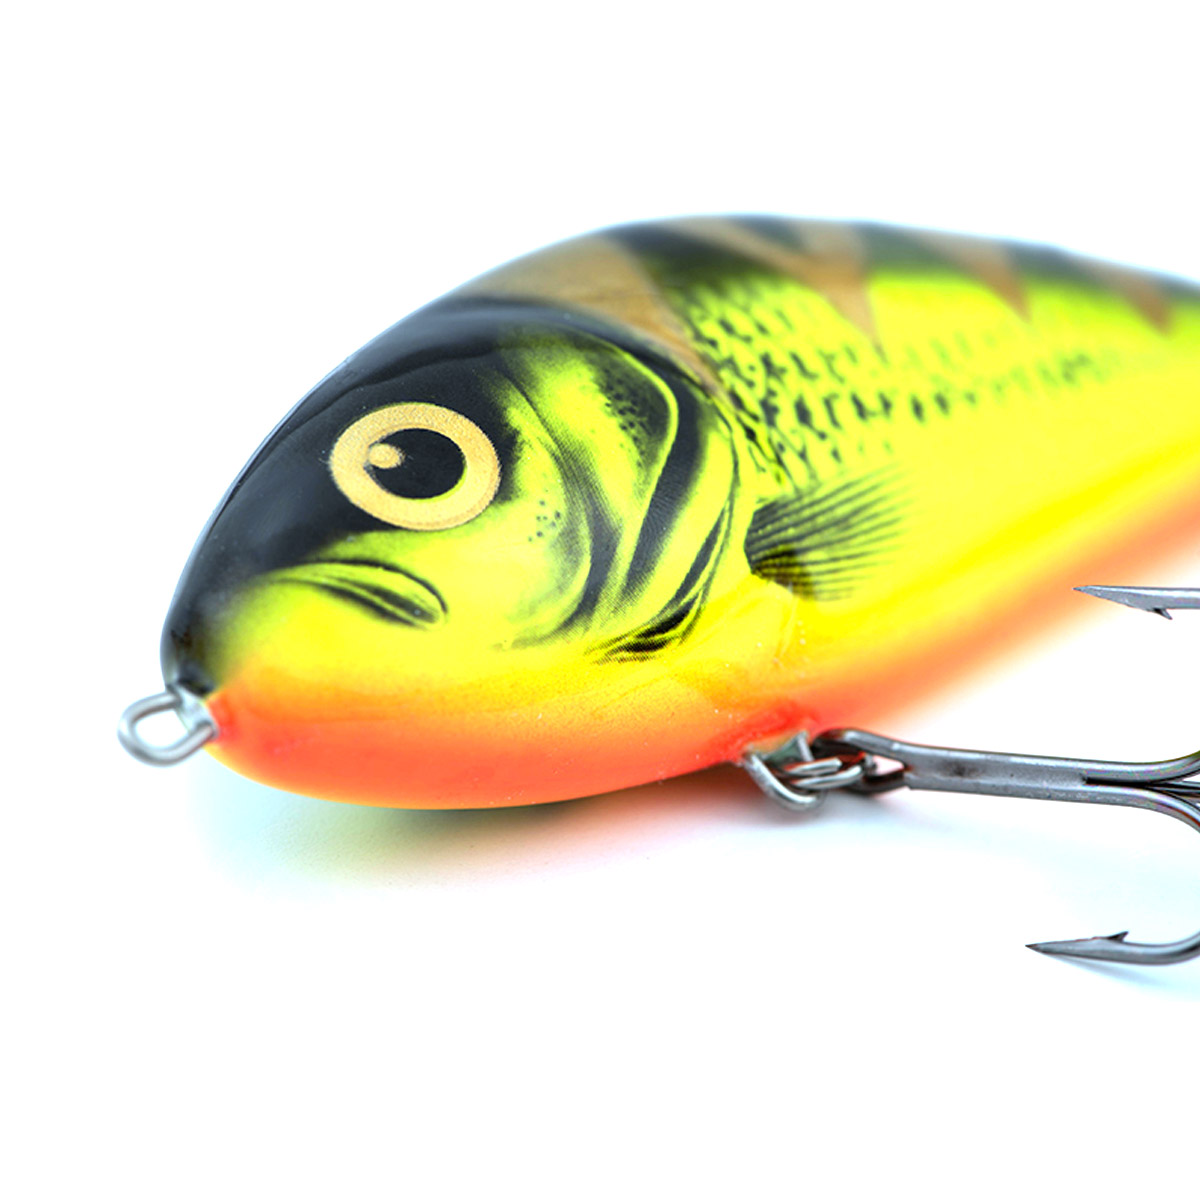 Salmo Fatso Sinking Limited Edition 14 CM